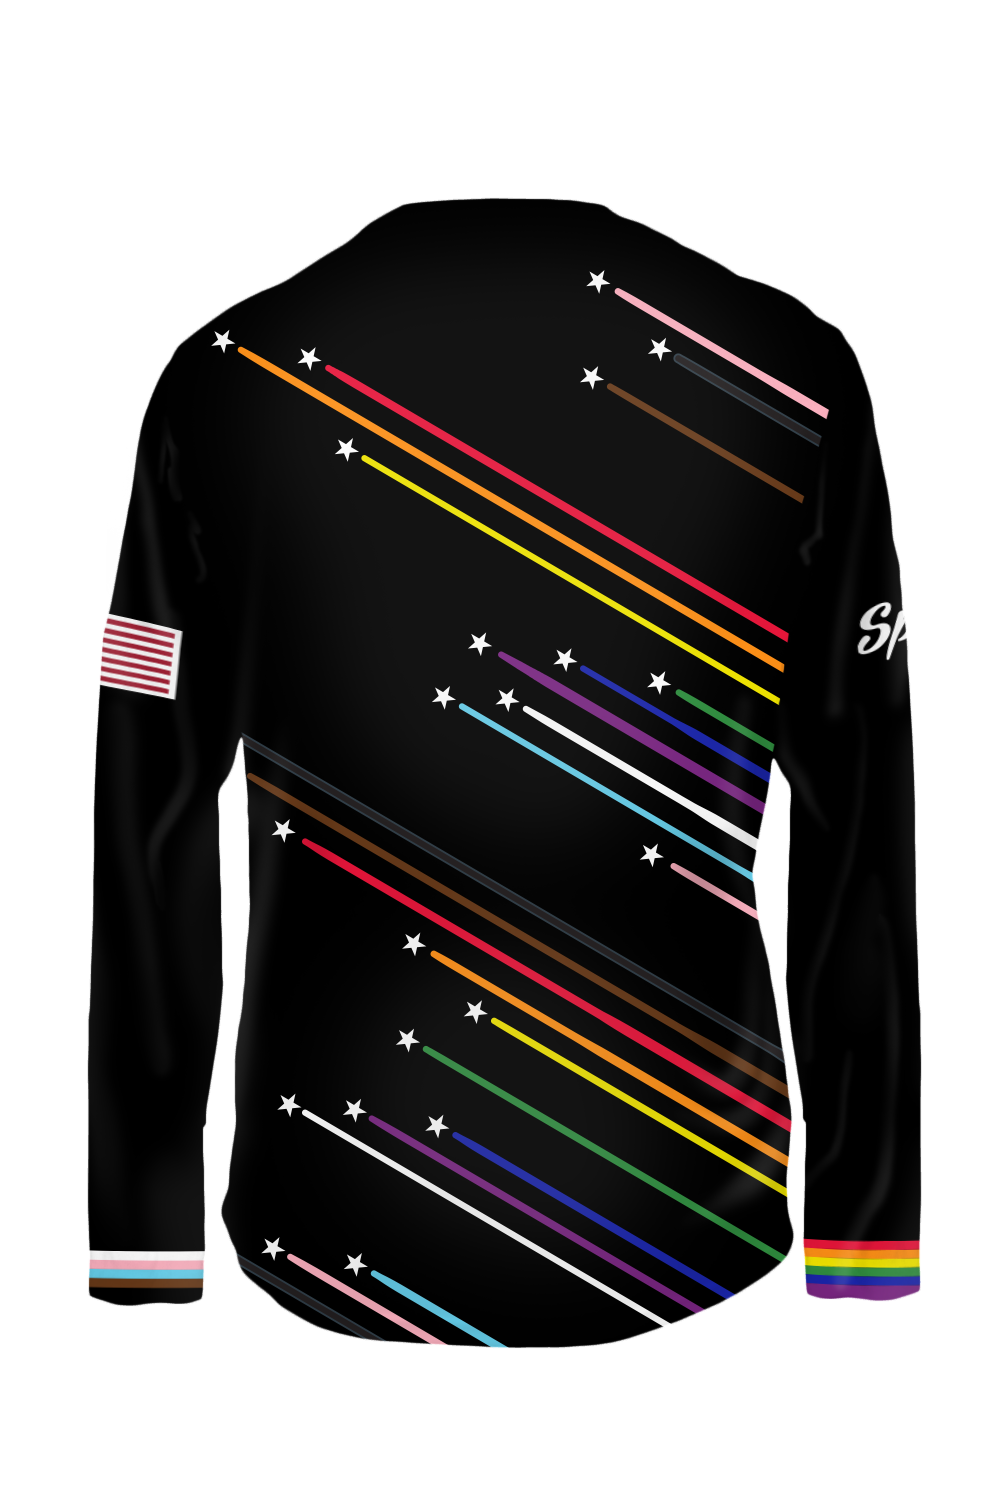 USNT Special Edition Long Sleeve Jersey